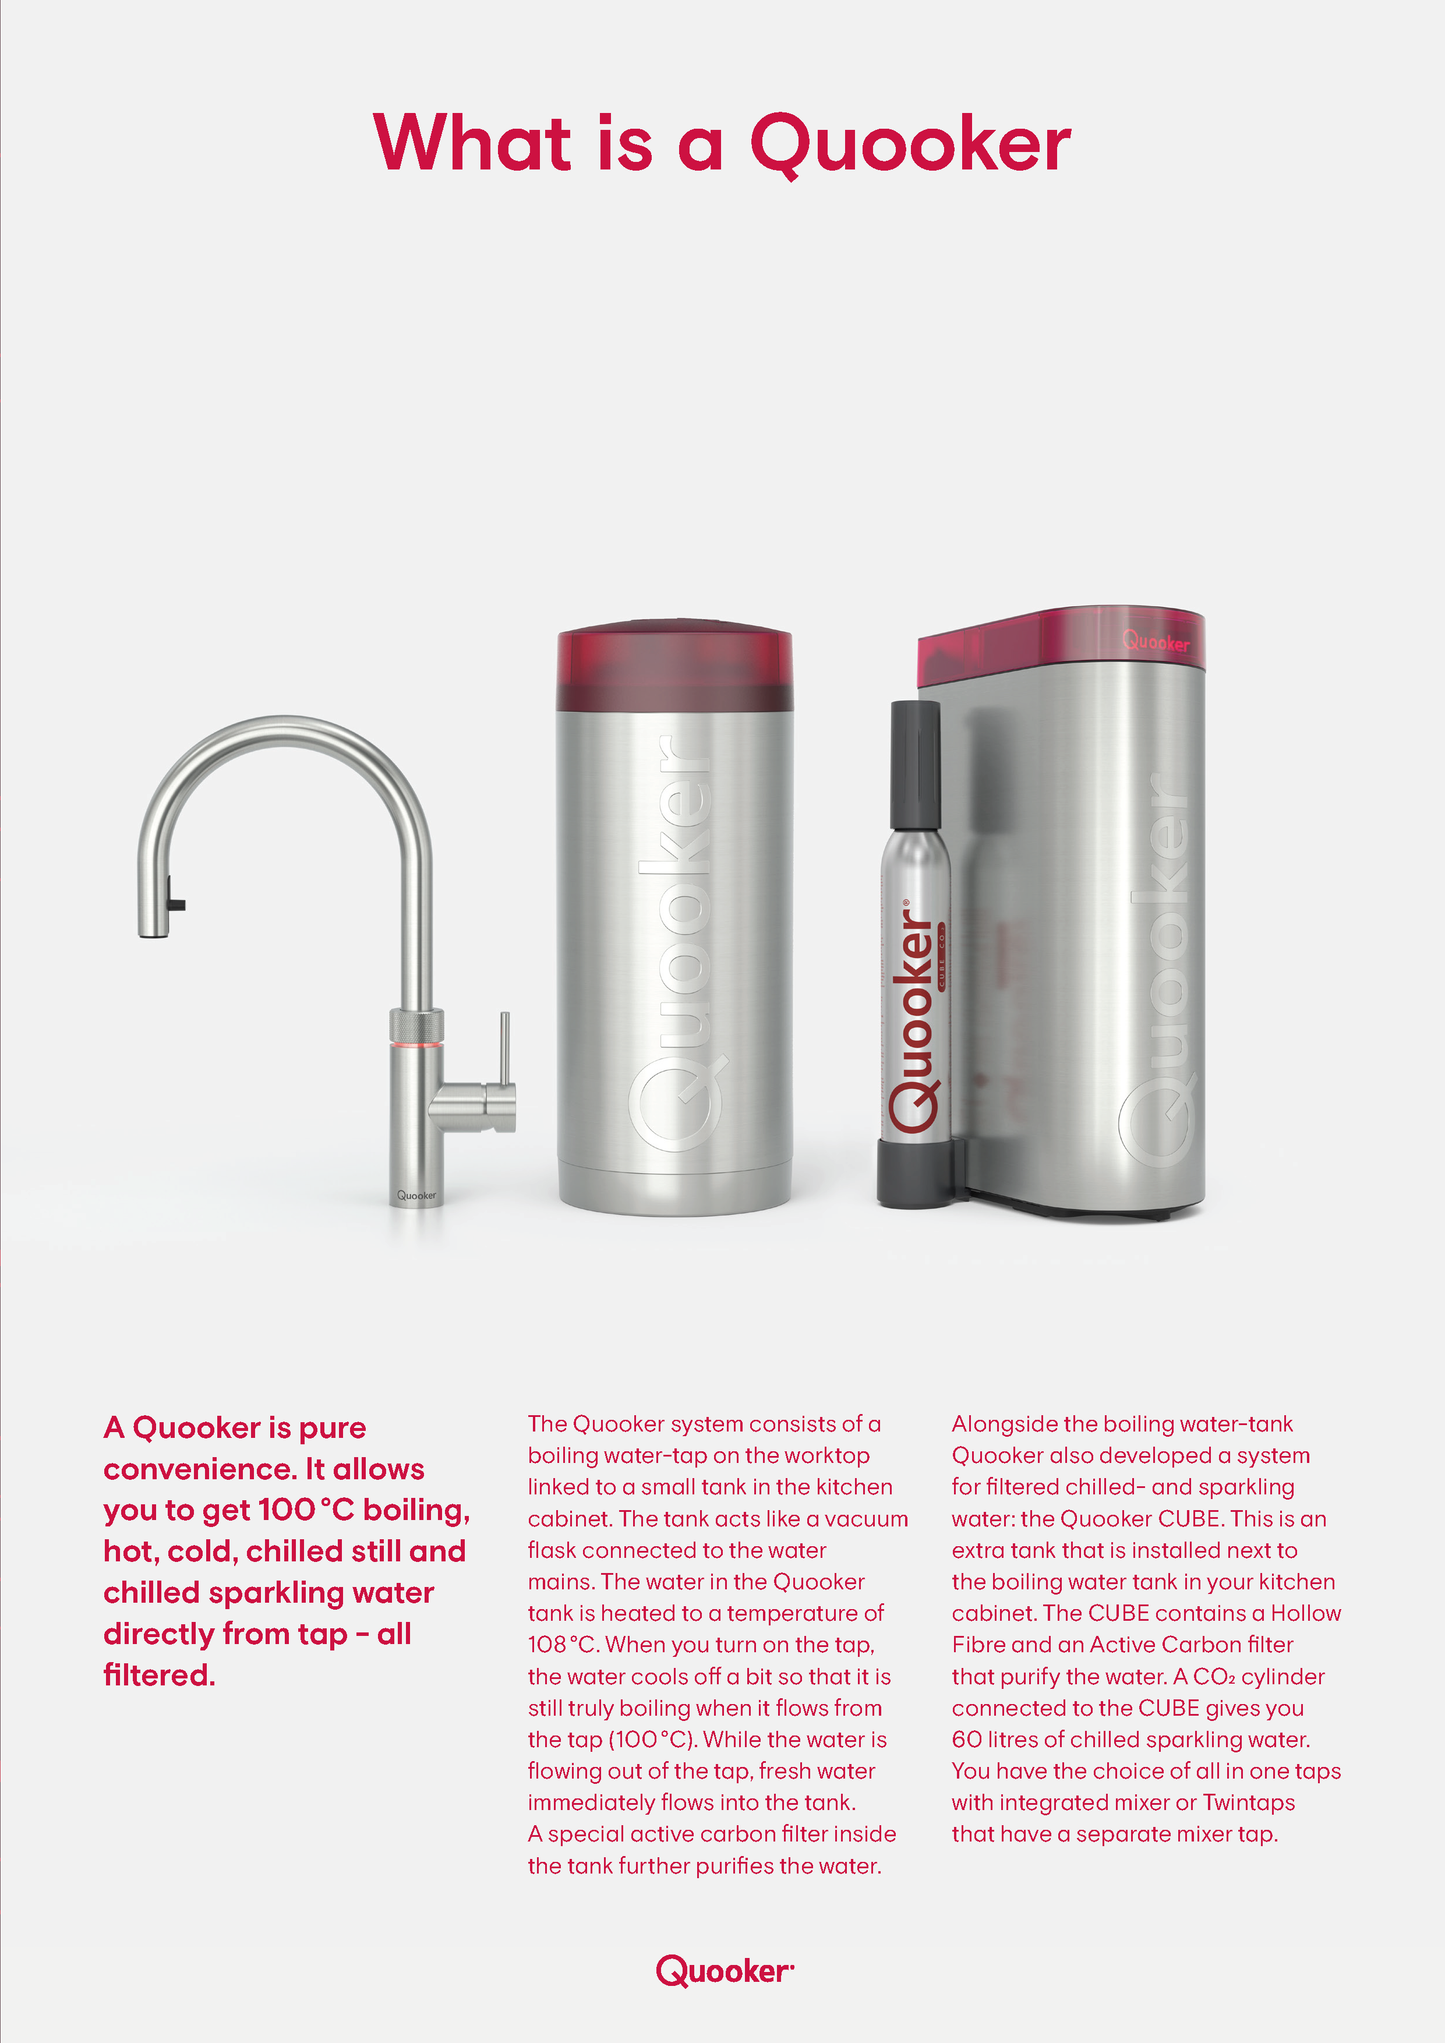 【QUOOKER】CLASSIC FUSION 滾水水龍頭 Instant Hot /or Warm /or Chilled /or Sparkling Water Tap | From Netherlands |